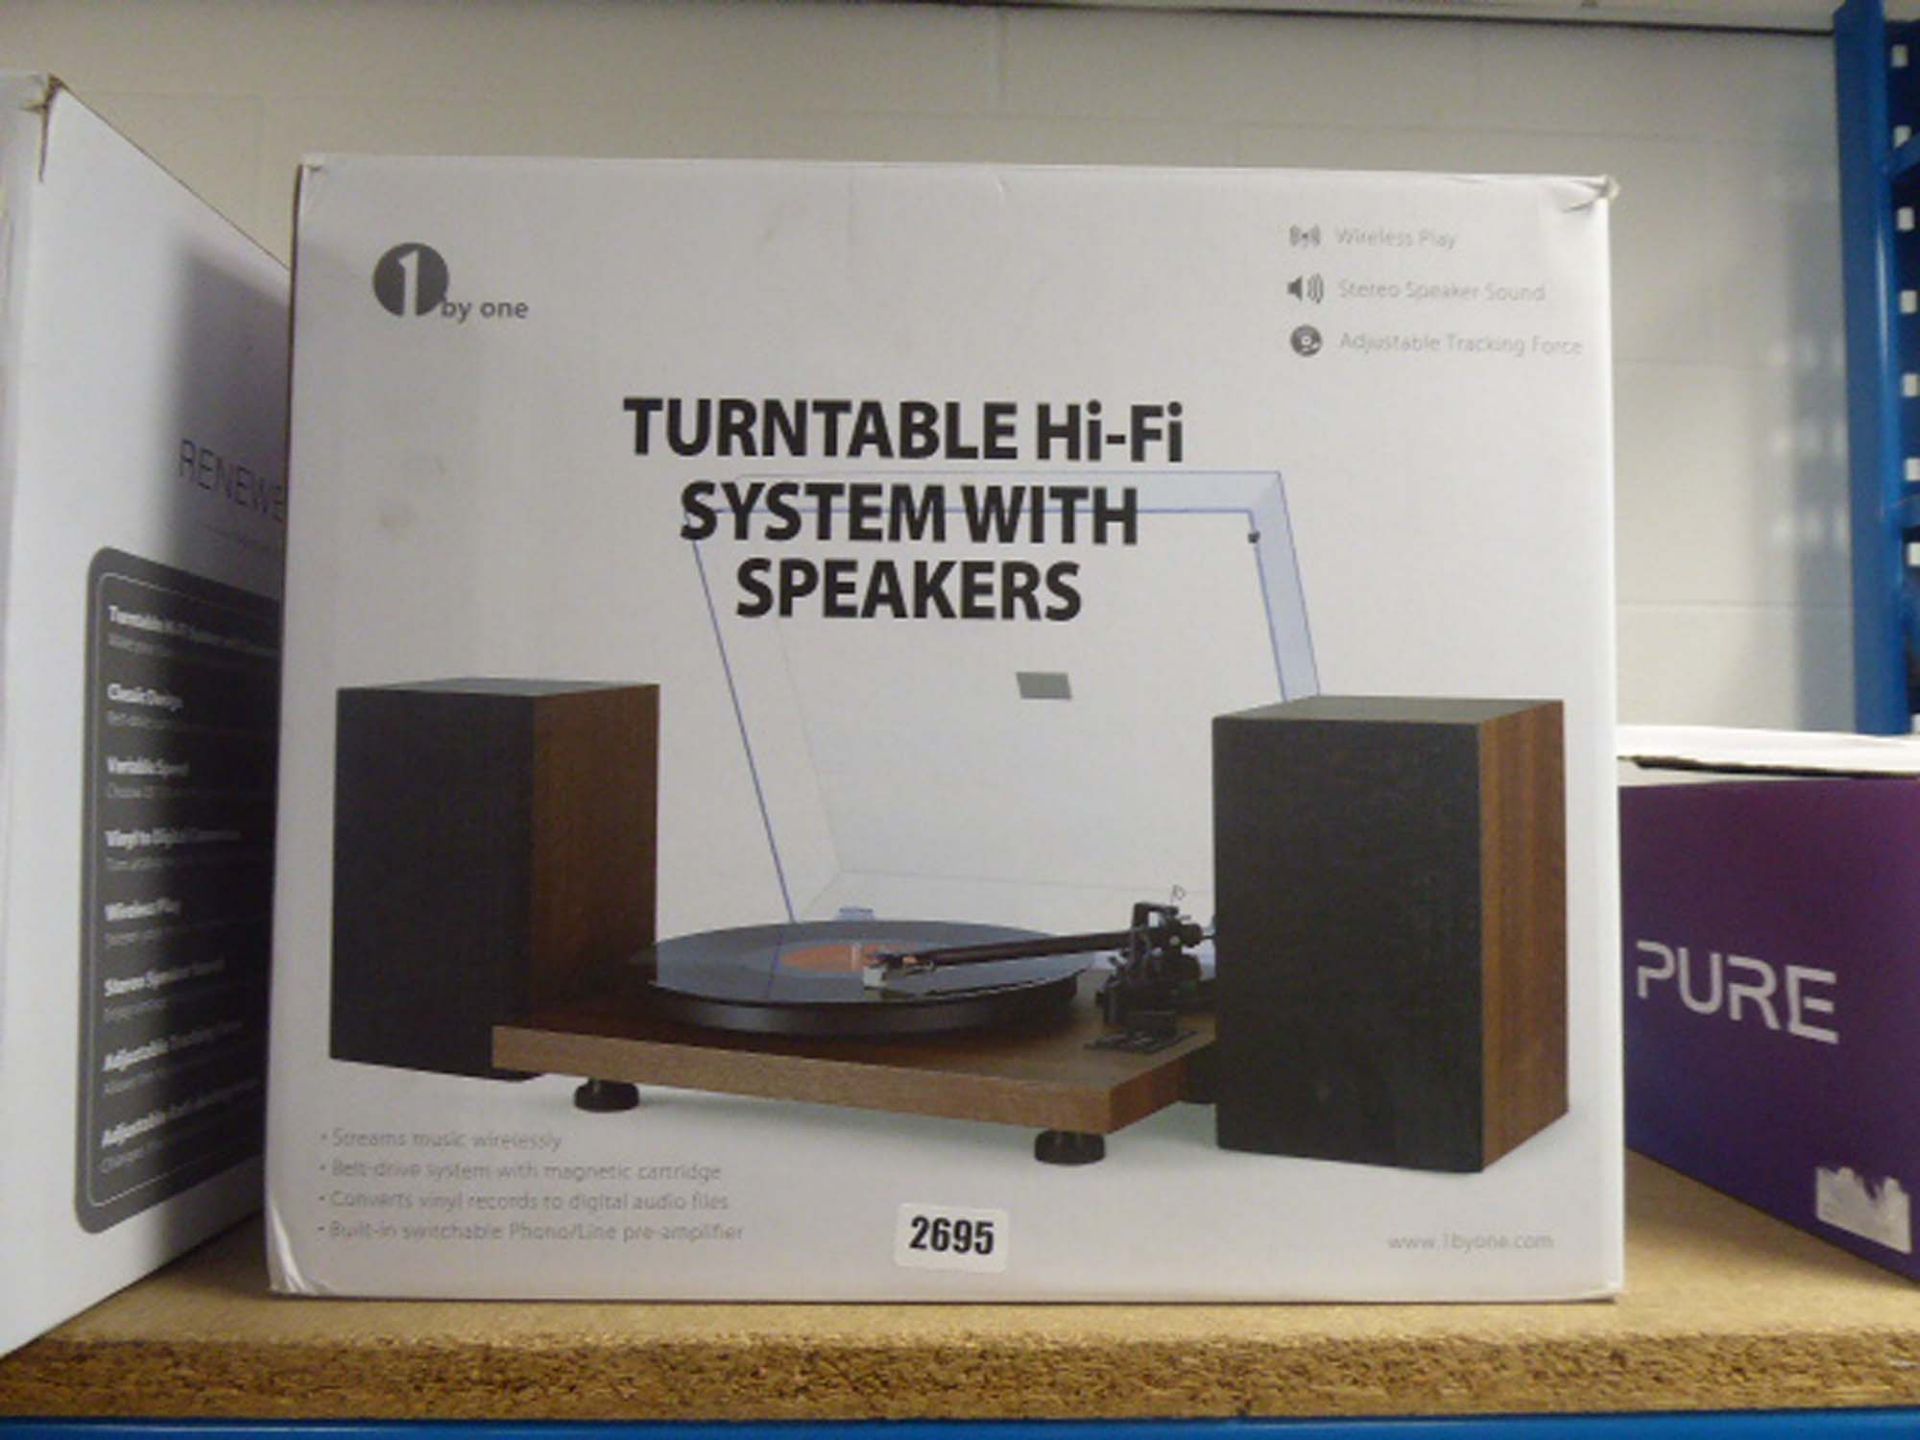 1 BY ONE turntable hifi system with speakers